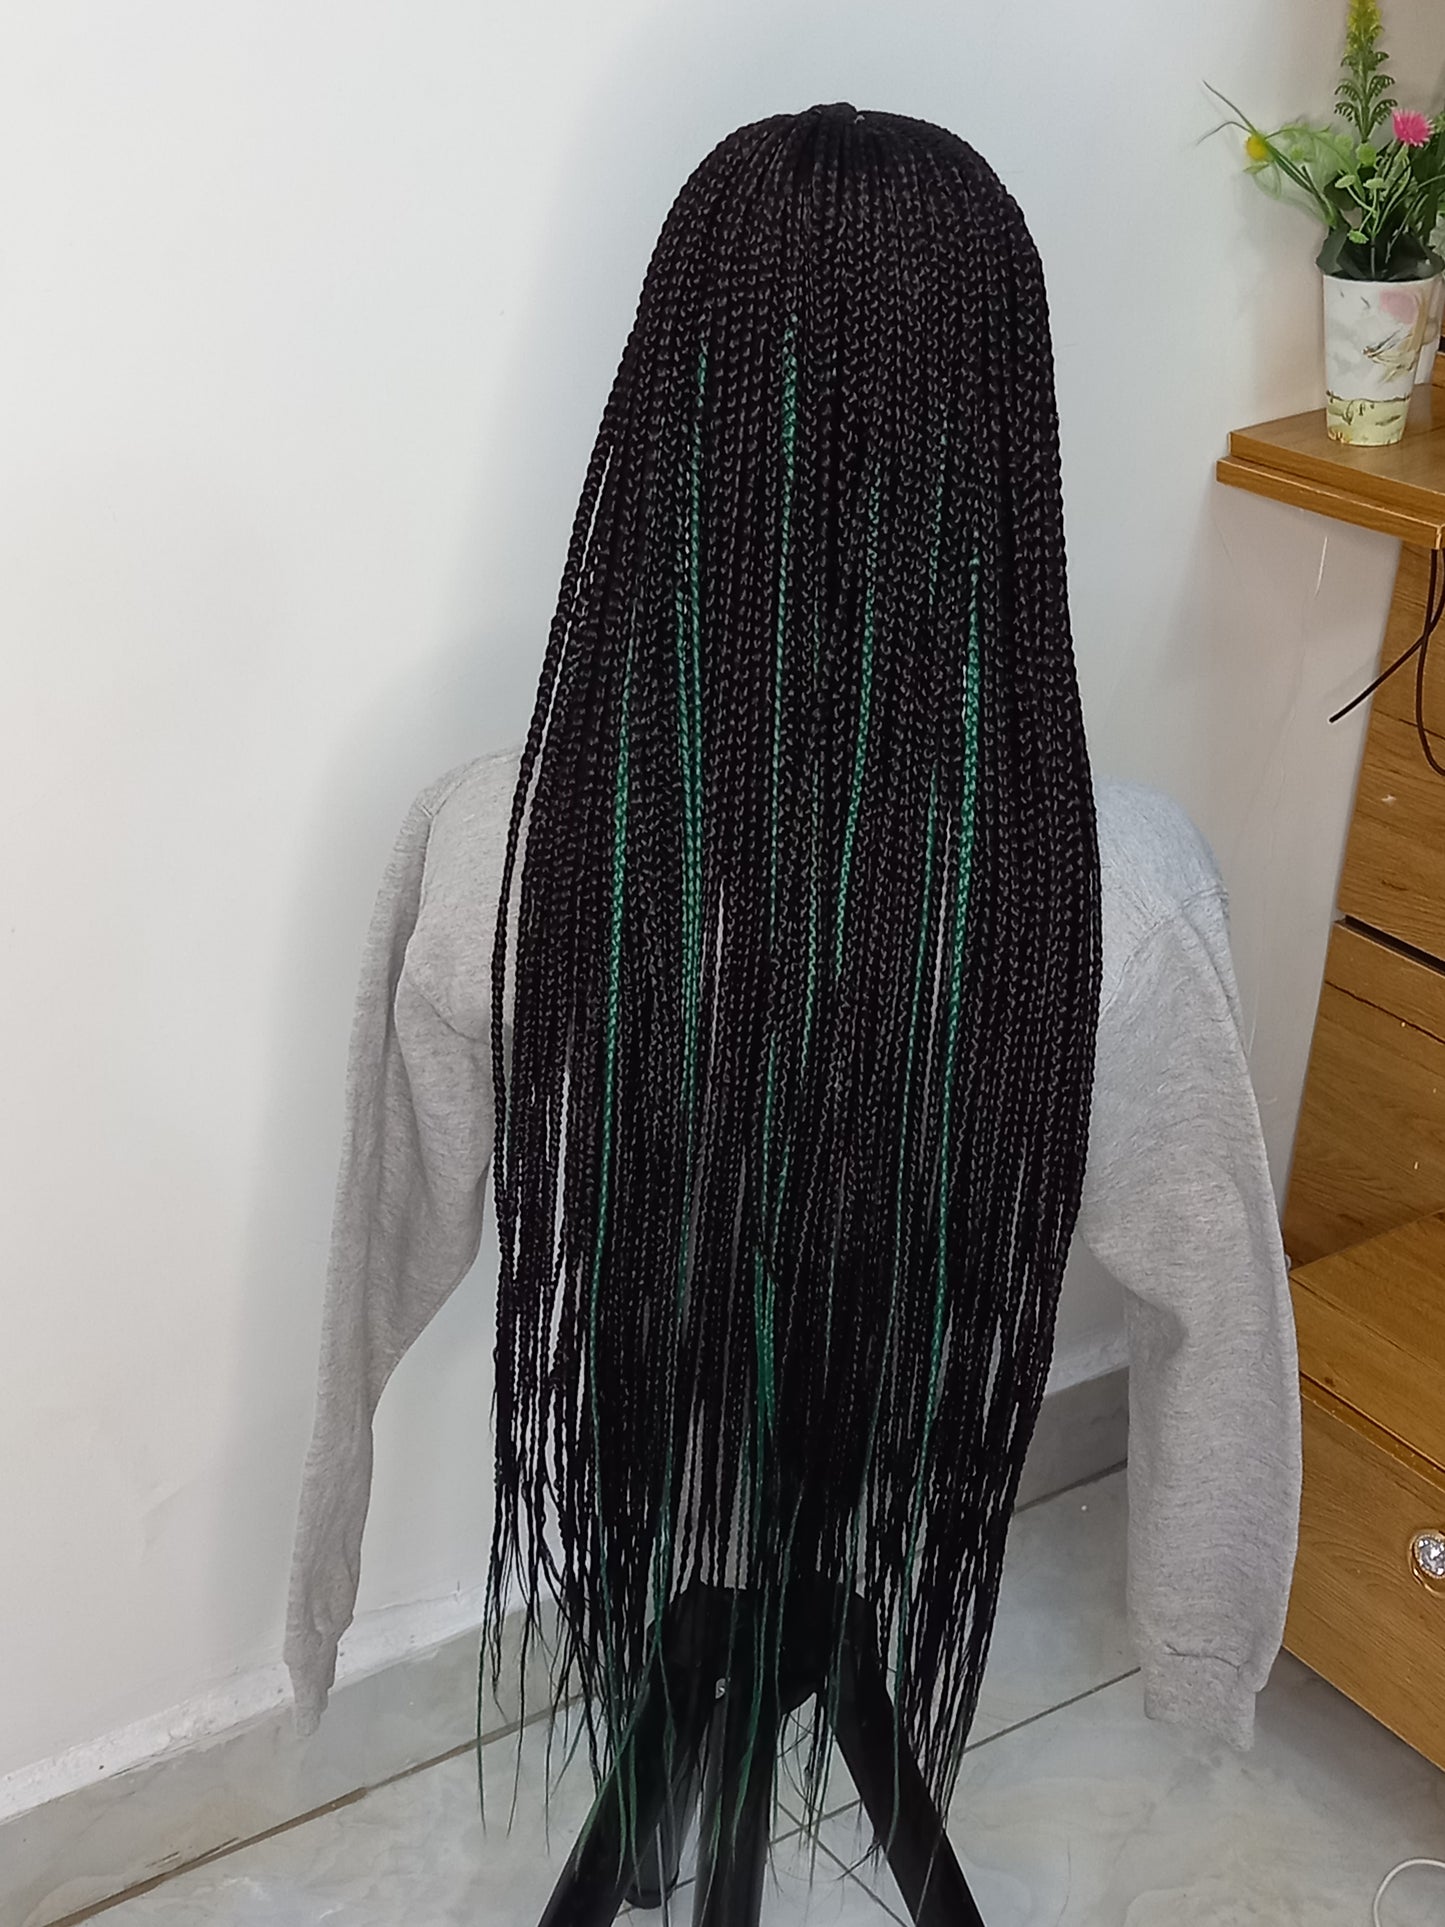 Stunning Cornrow Wigs on 13 by 6 Lace Front for Black Women: Handmade, Synthetic, and Braided Options Available